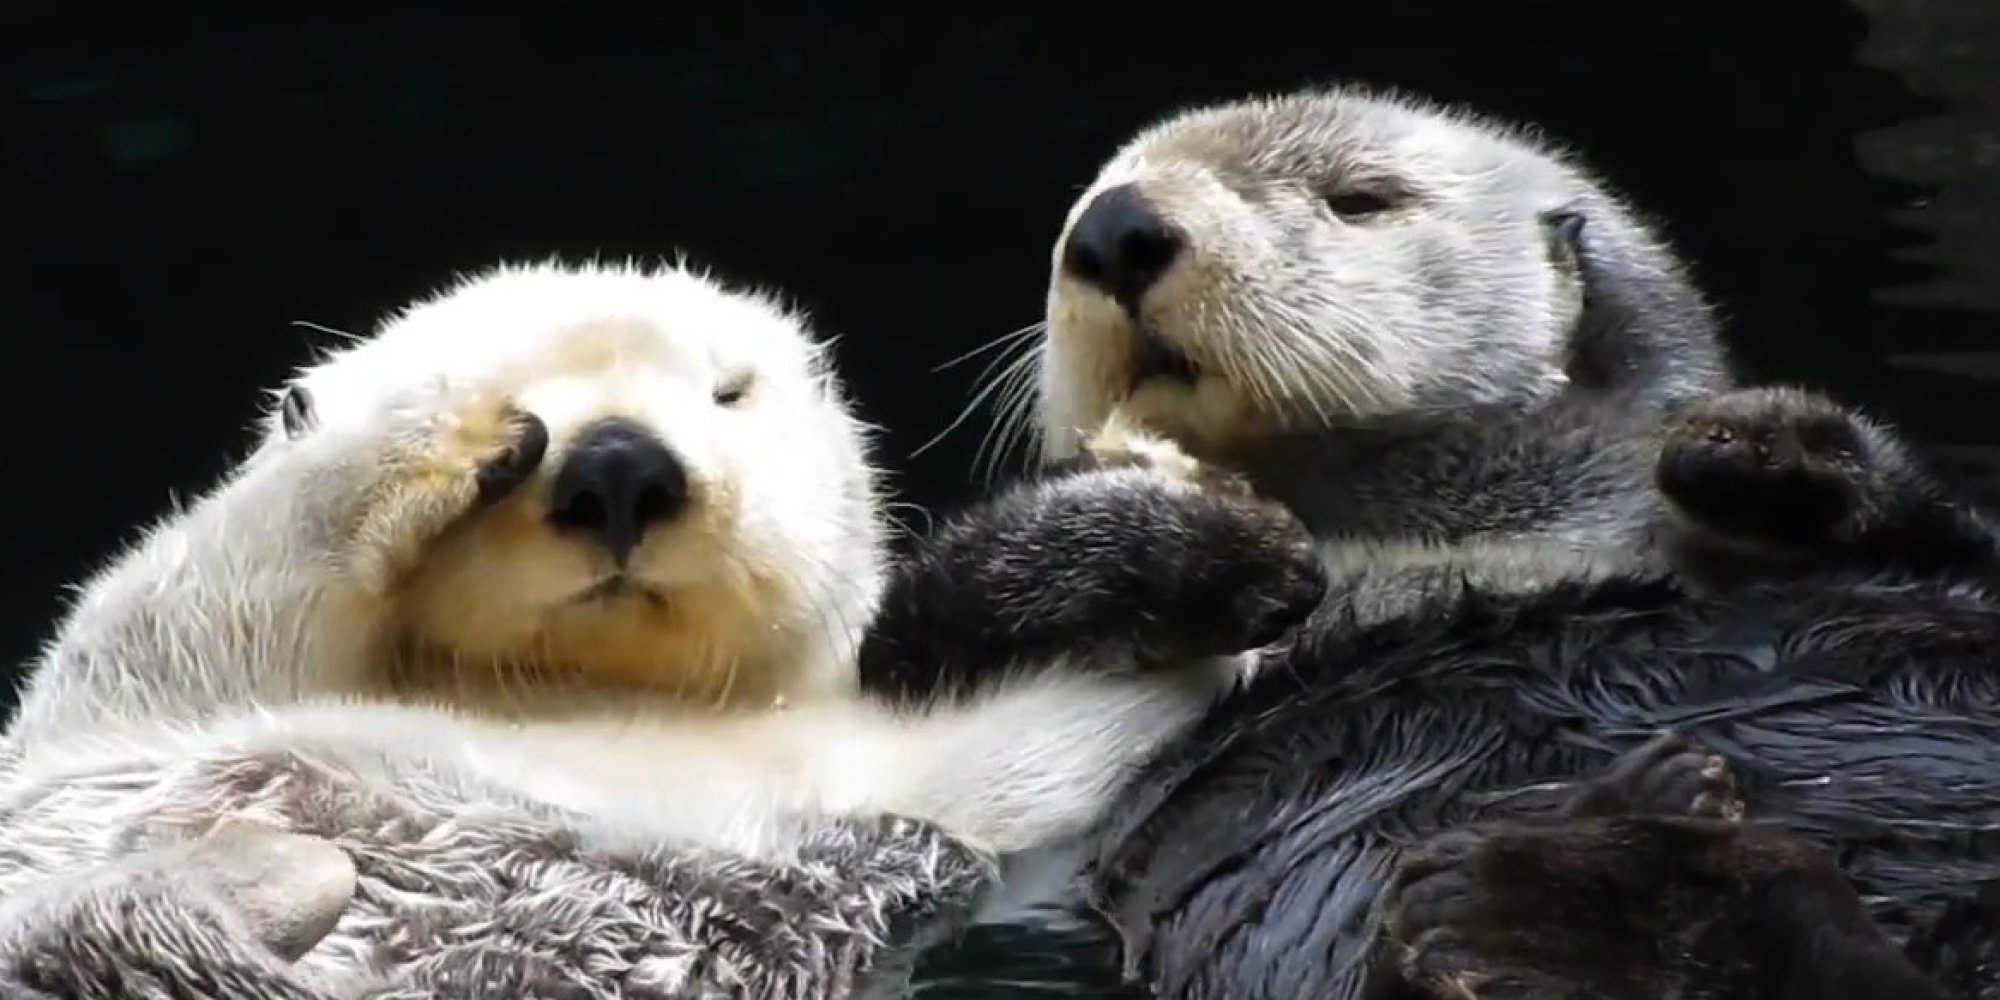 Watch This Video And Fall Otter ly In Love With These Adorable Critters